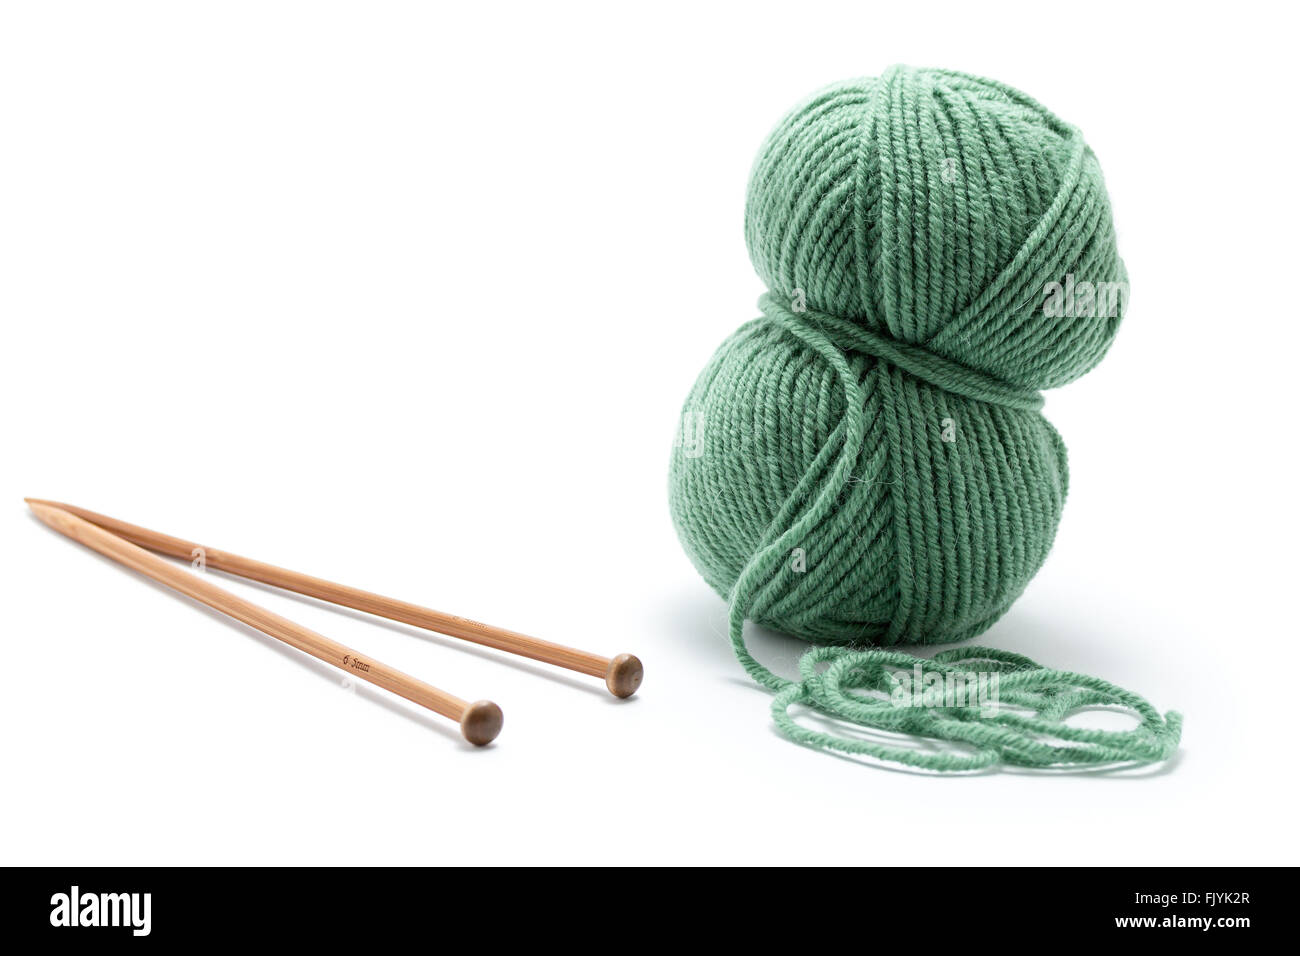 Skein of green yarn with knitting needles Stock Photo